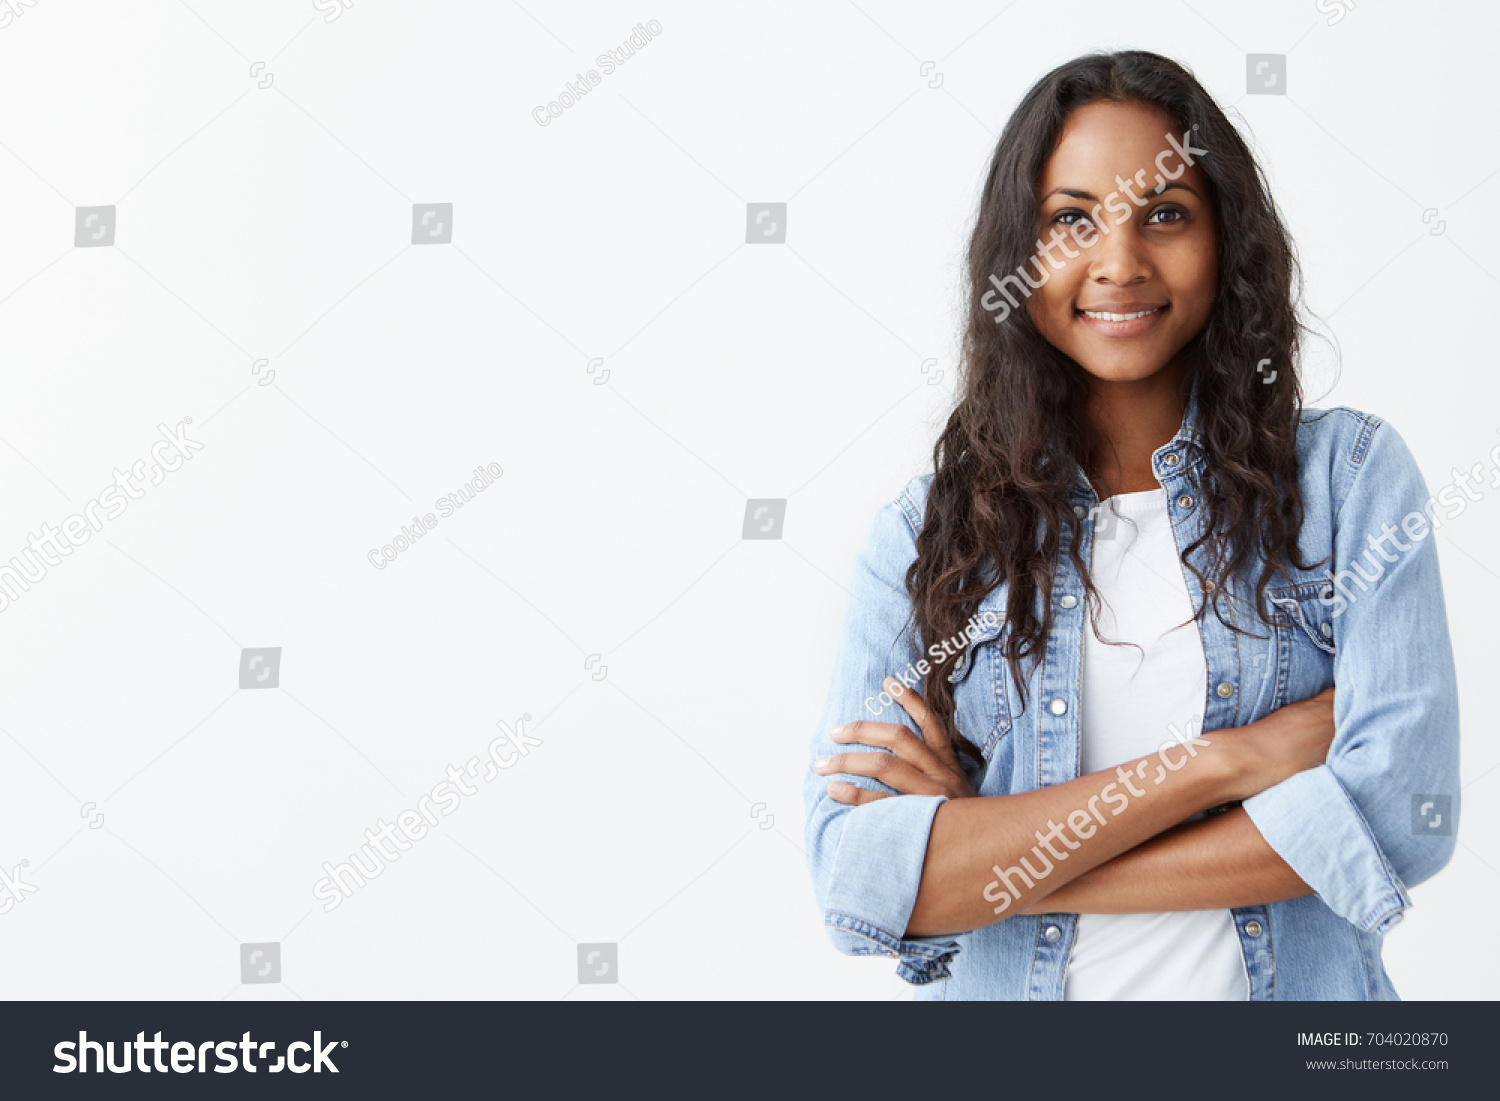 Glad young good looking Afro-American woman with clean dark skin and black long hair posing indoors with crossed arms, smiling broadly with white teeth, laughing at good joke, wearing denim shirt over #704020870